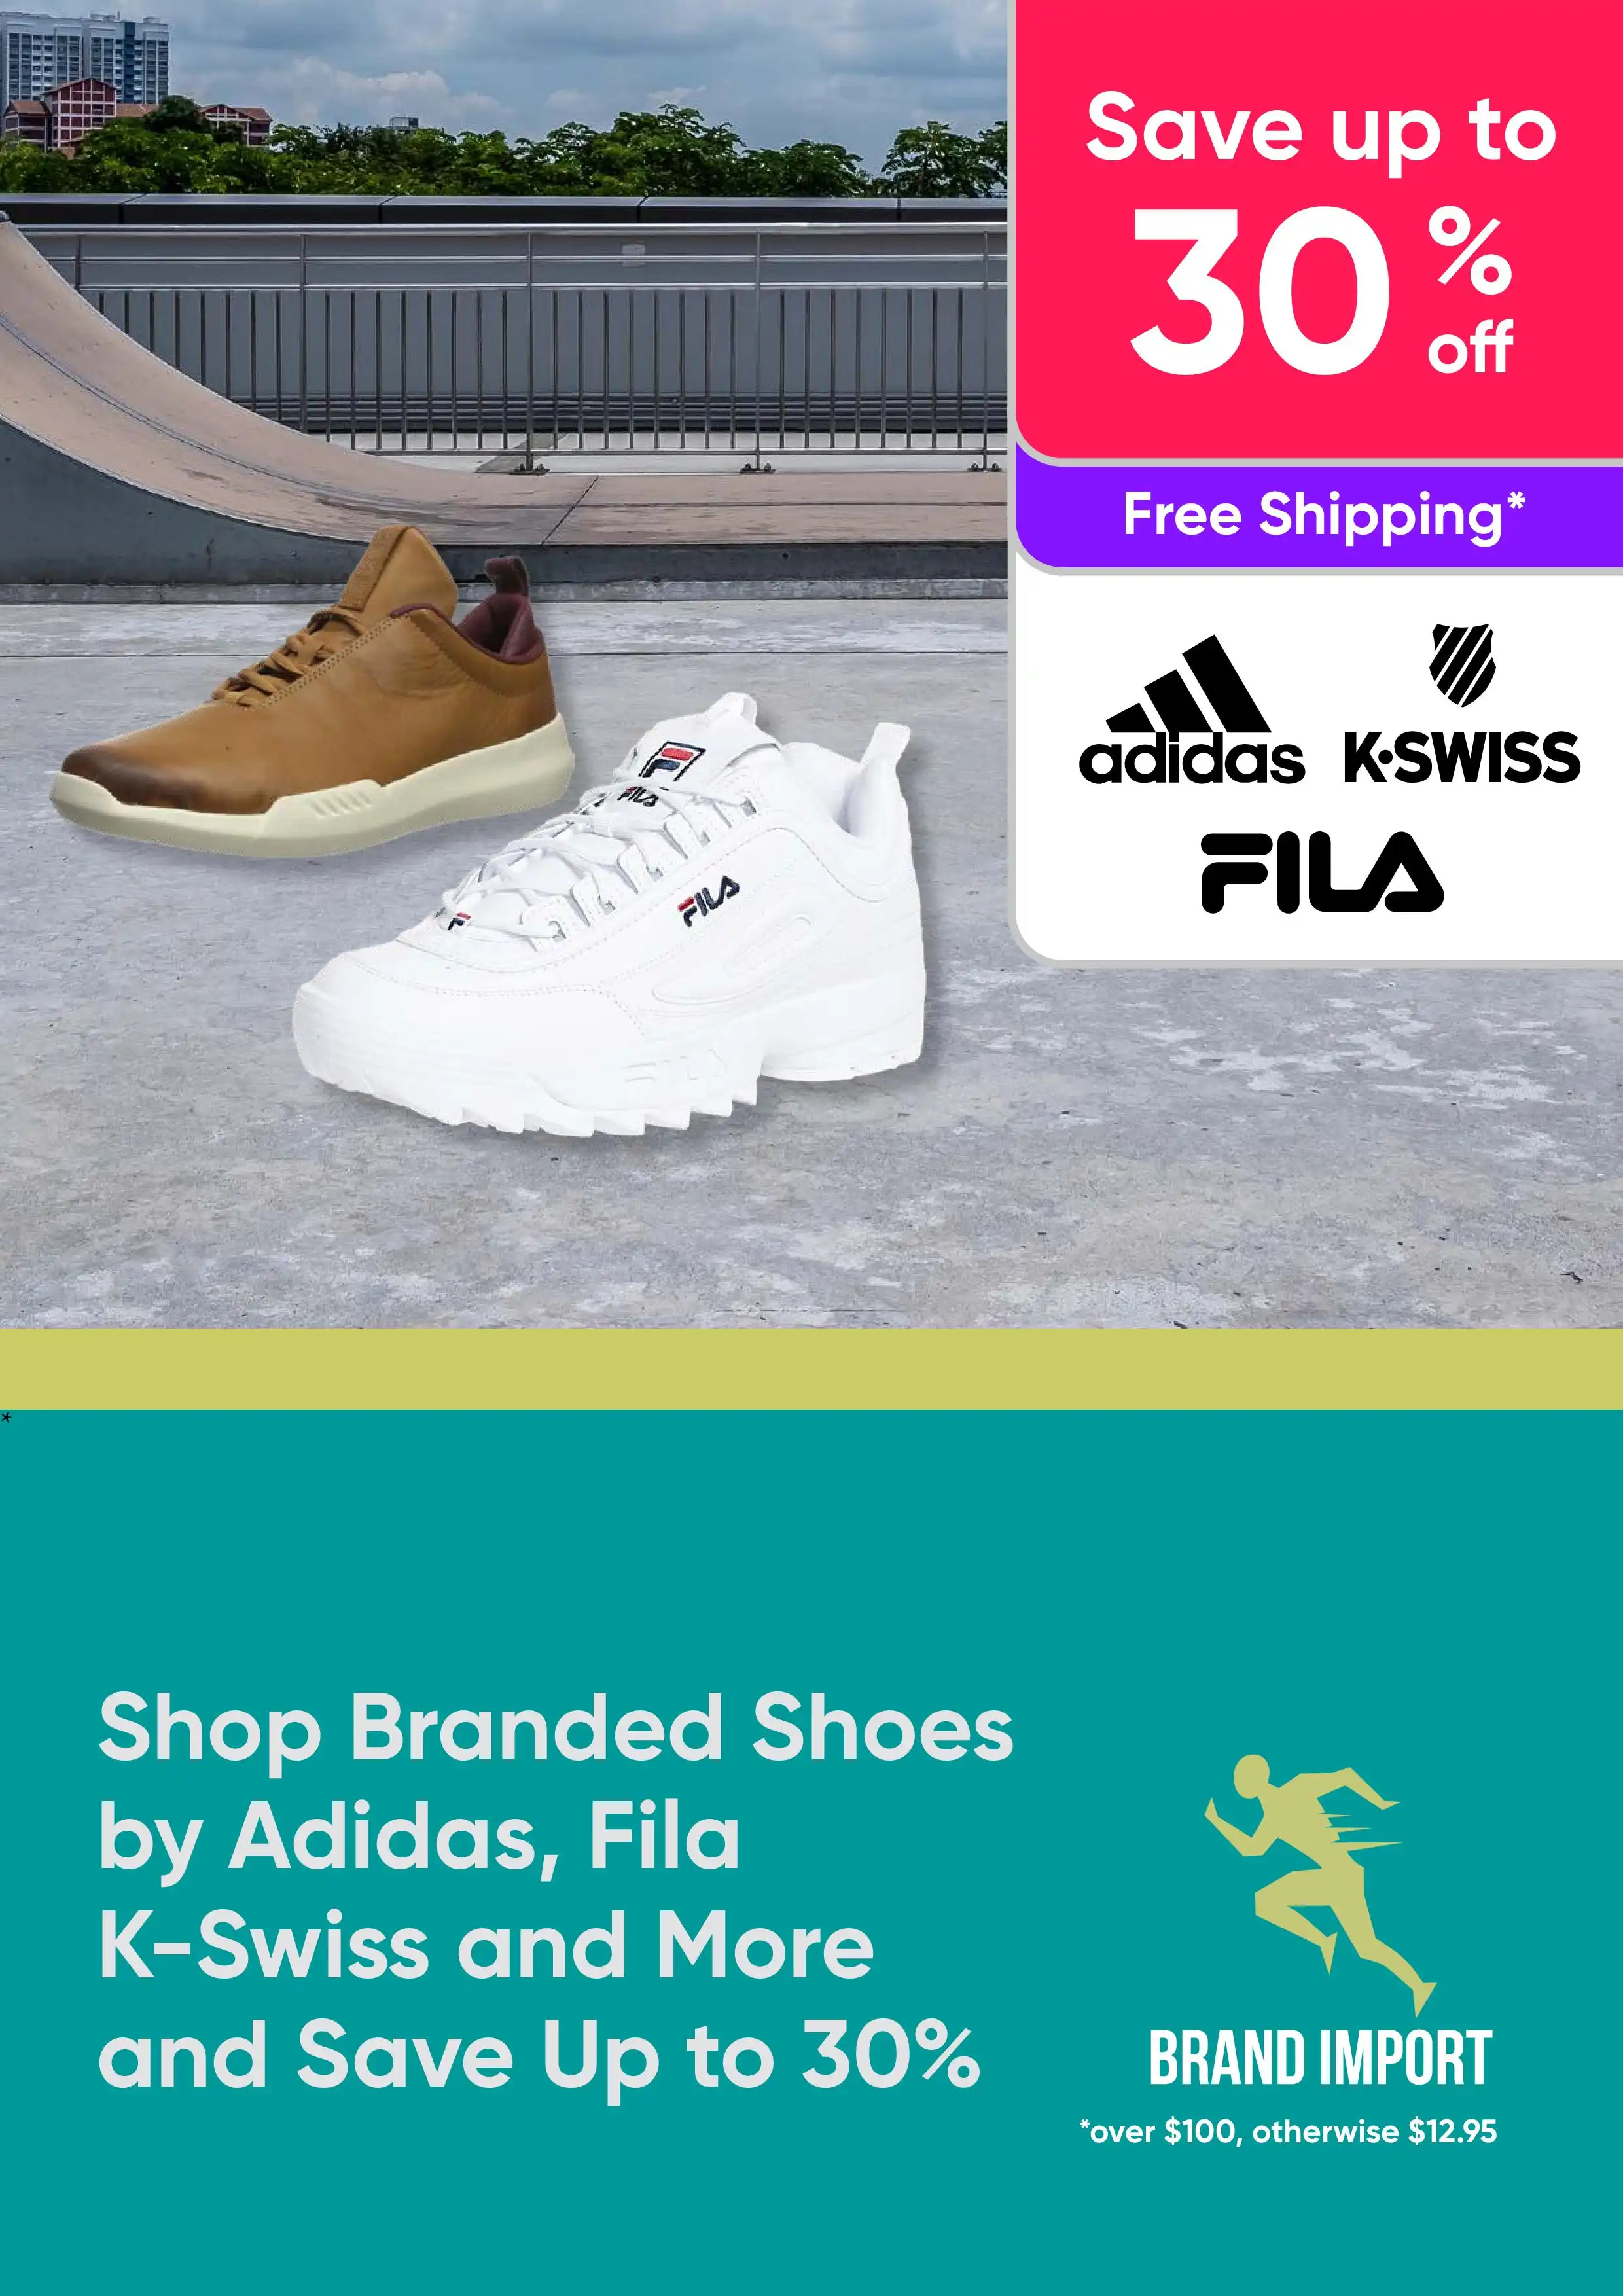 Shop Branded Shoes by Adidas, Fila K-Swiss and More and Save Up to 30%